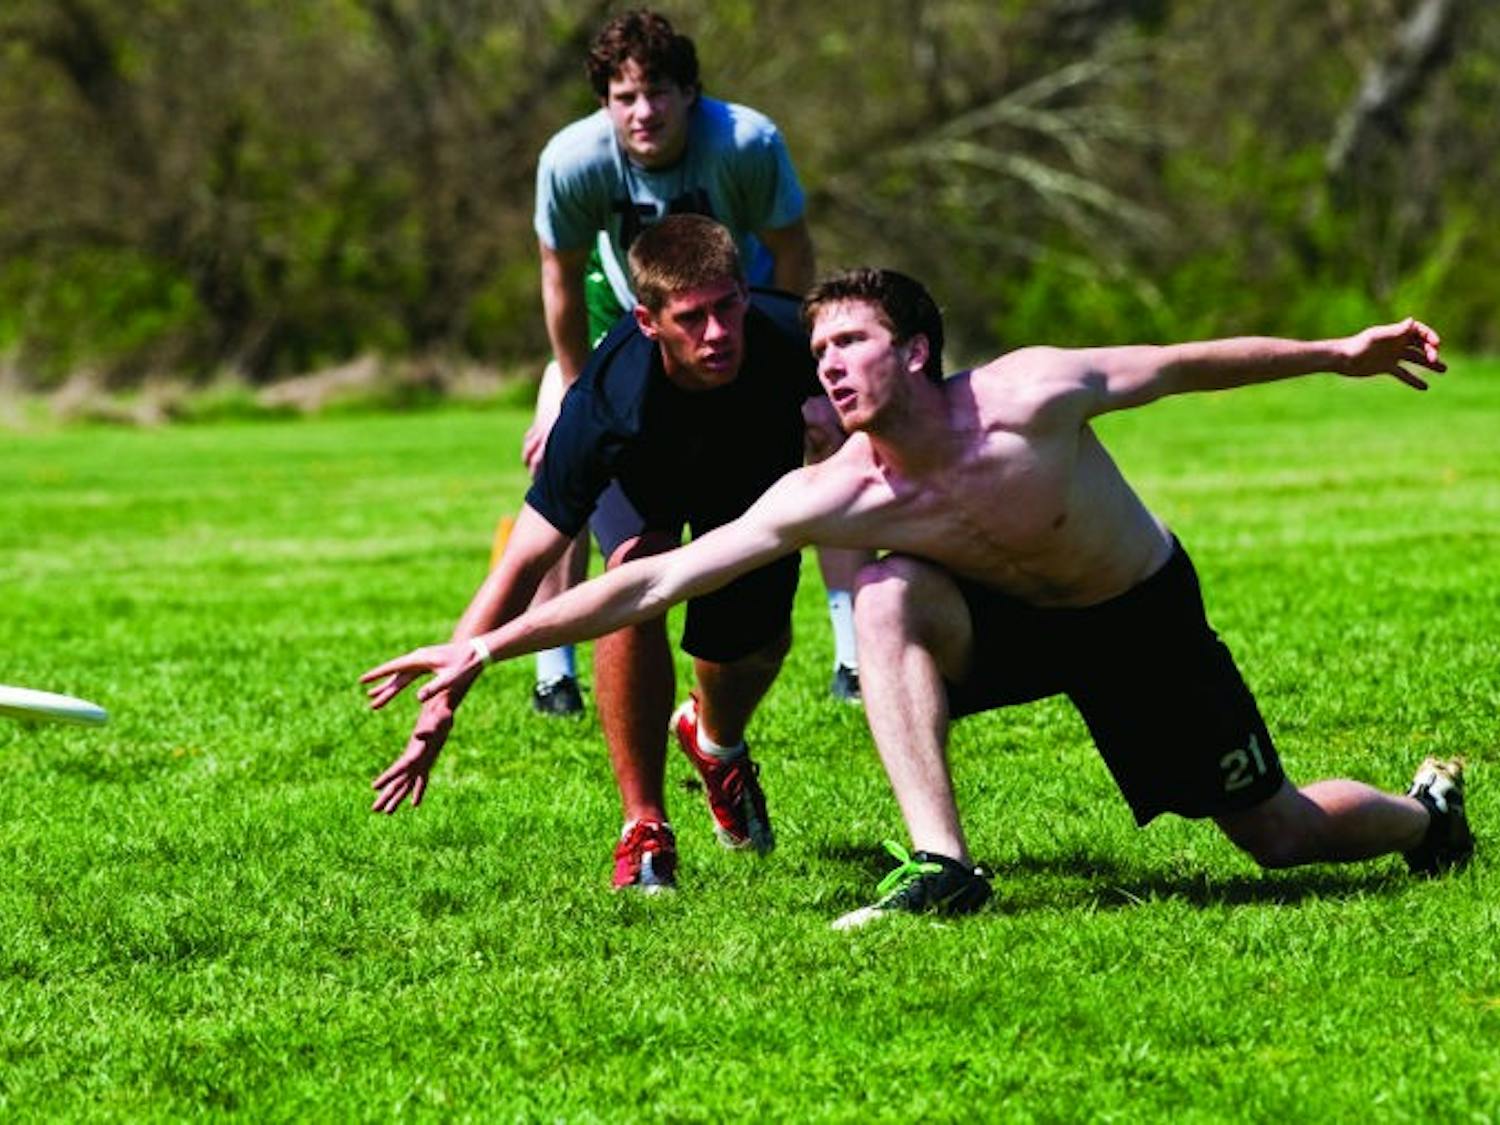 Club Sports: Ultimate team looking to earn 1st trip to national tourney  